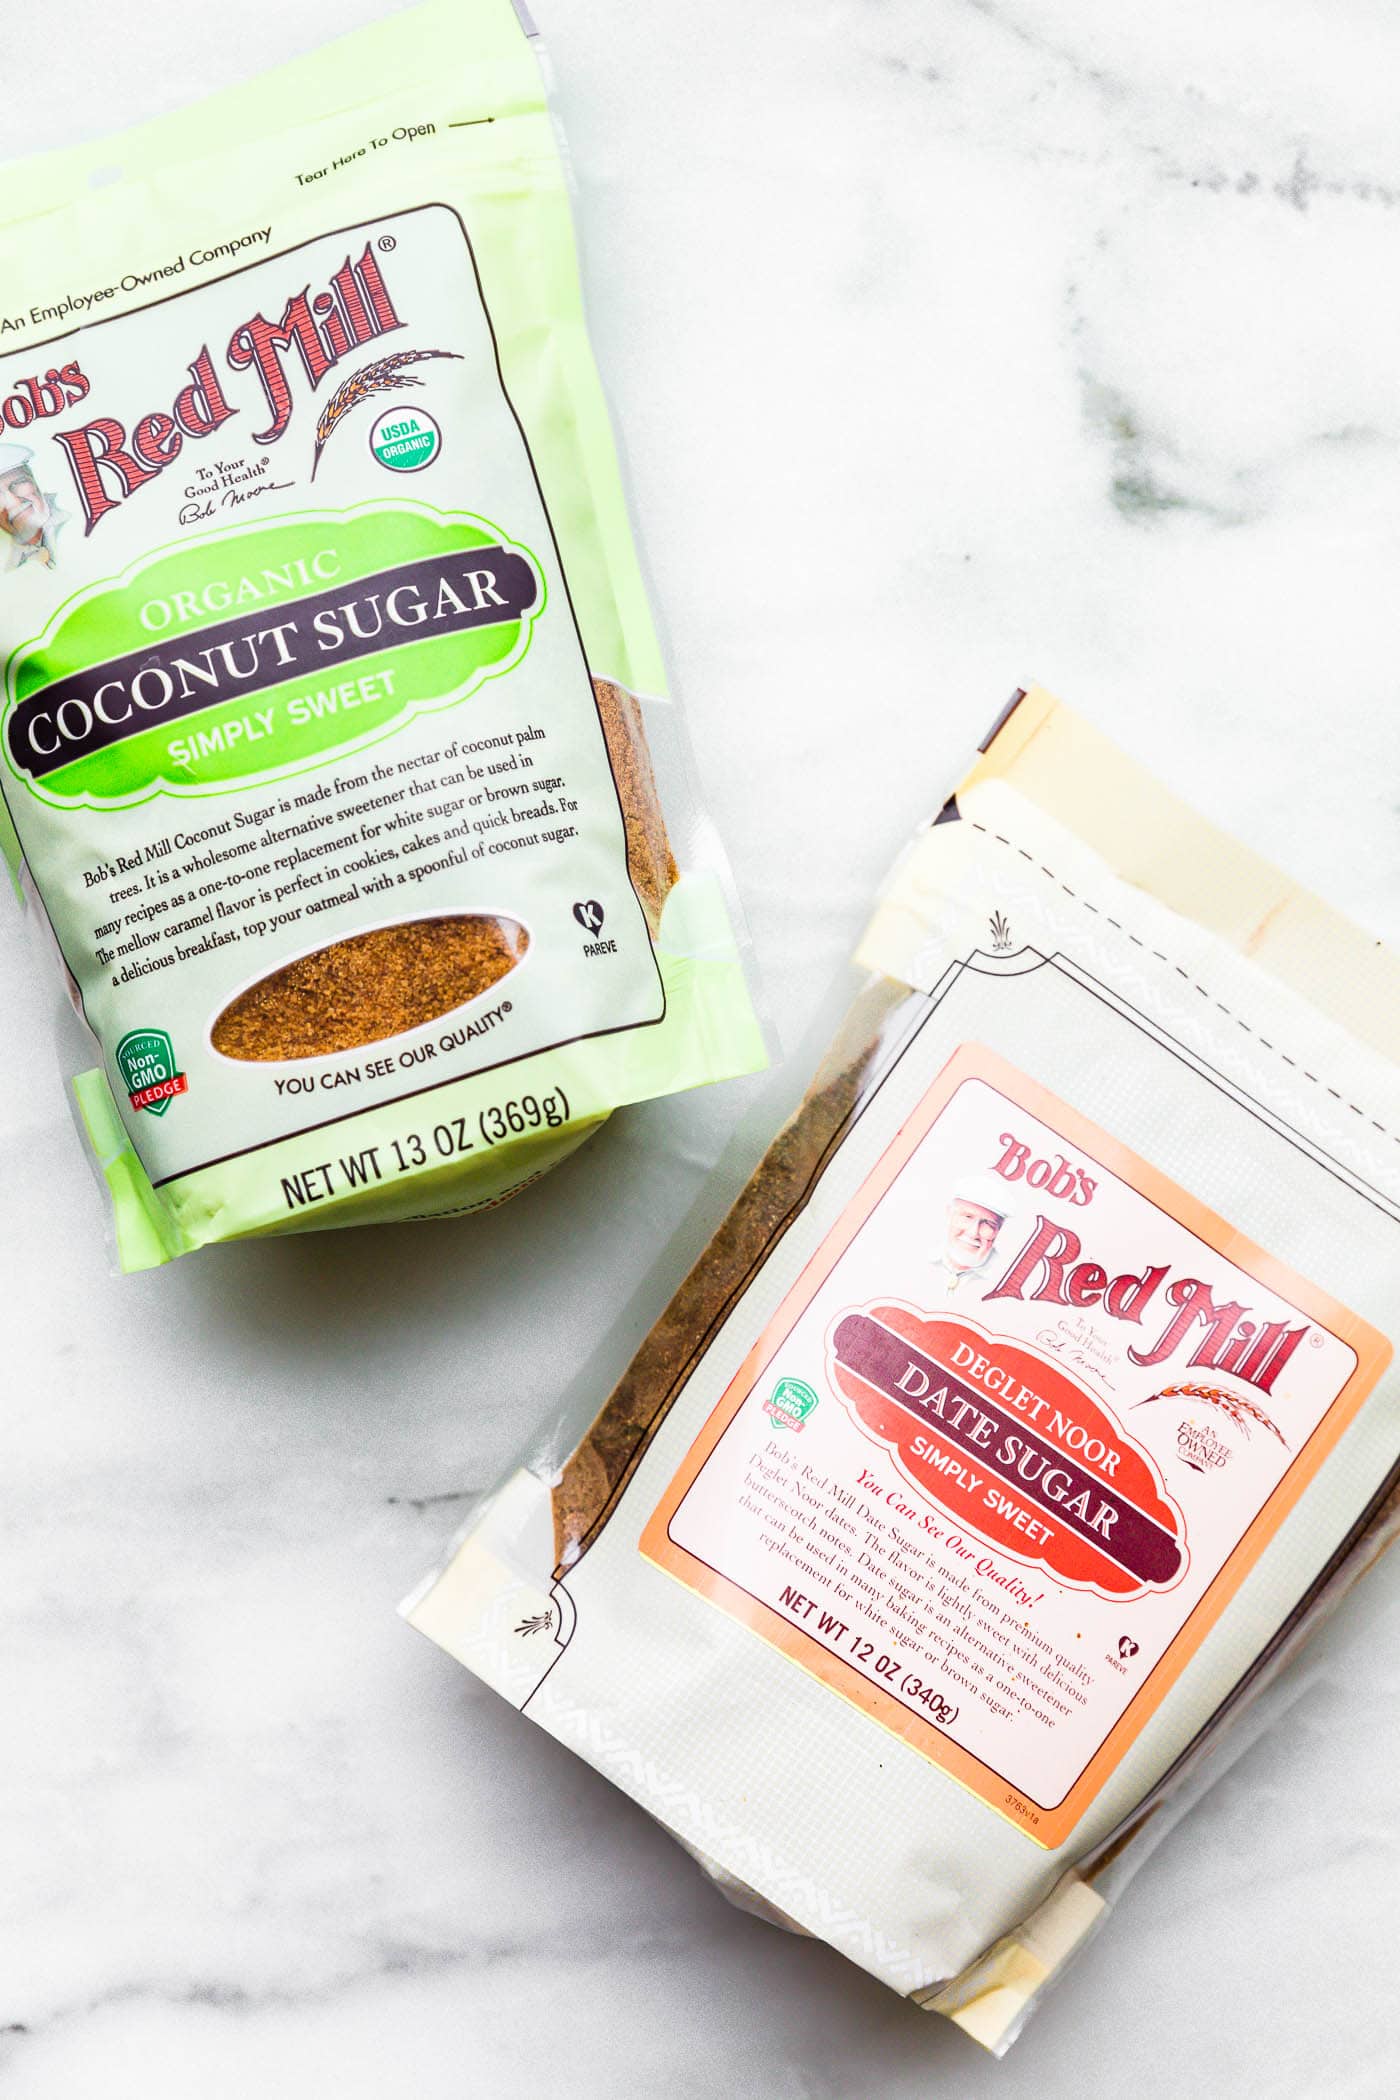 Two bags Bob's Red Mill of refined sugar free sugars